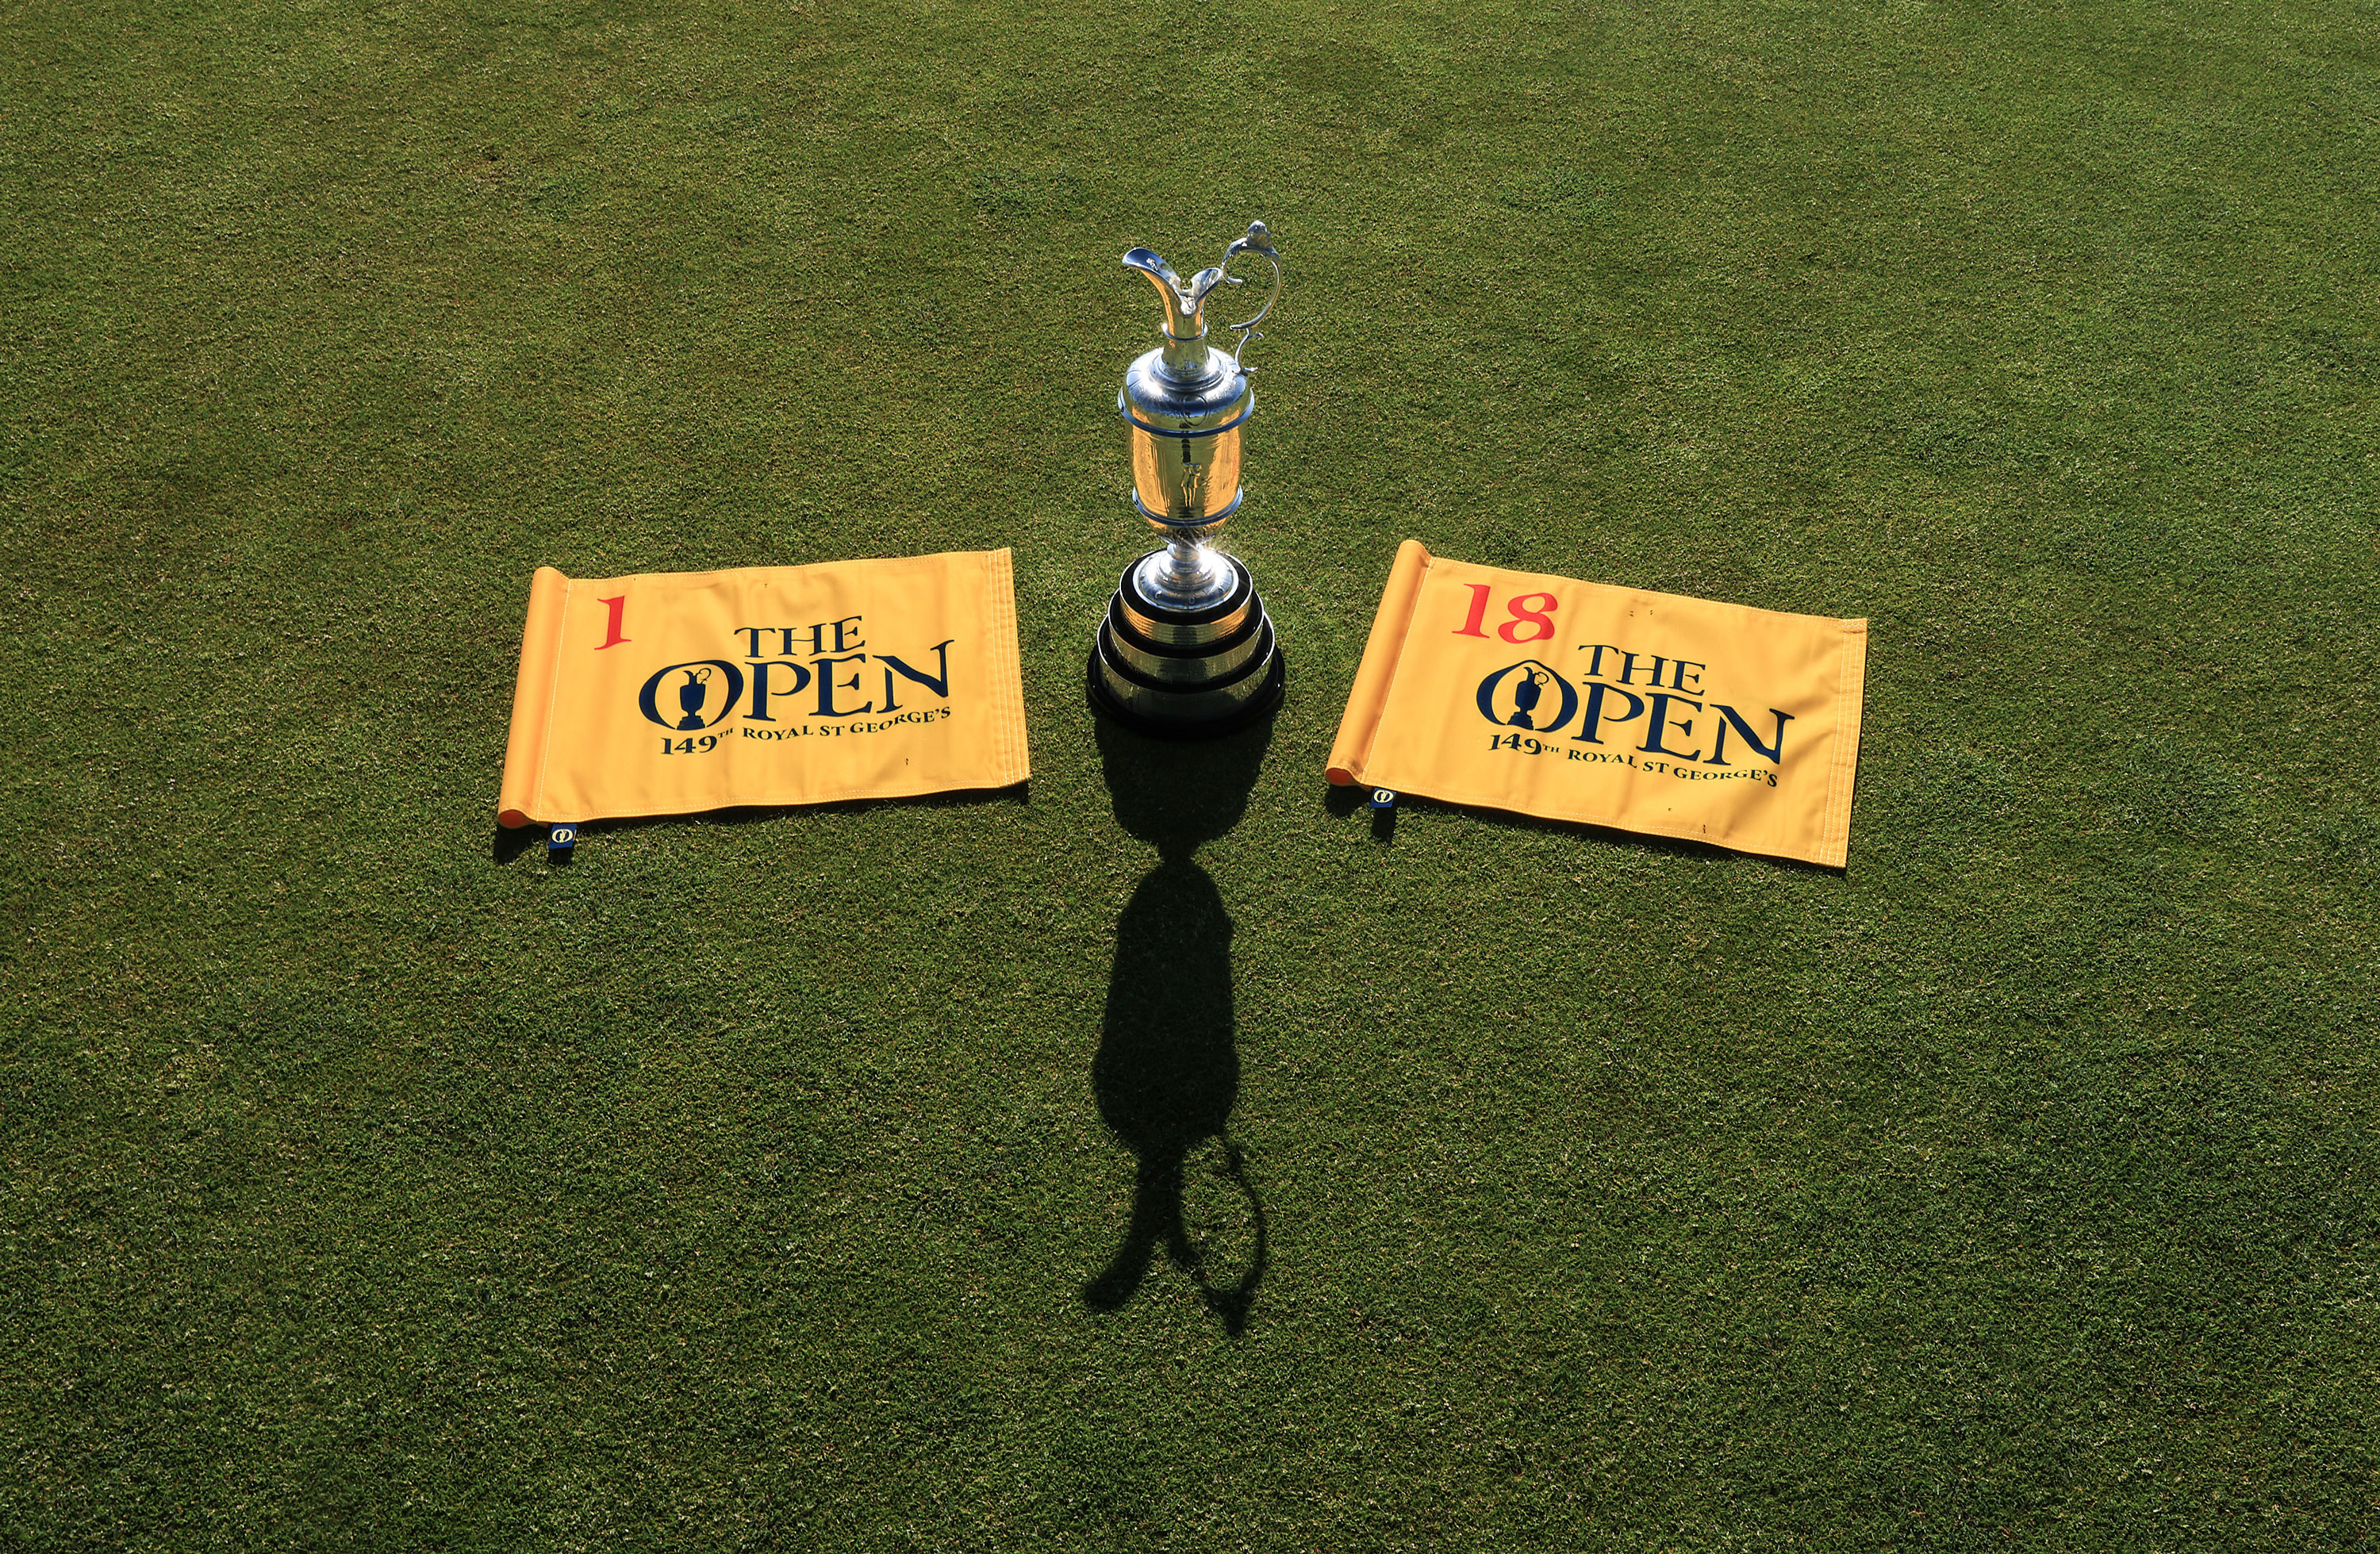 British Open 2021 How to watch the Open Championship at Royal St